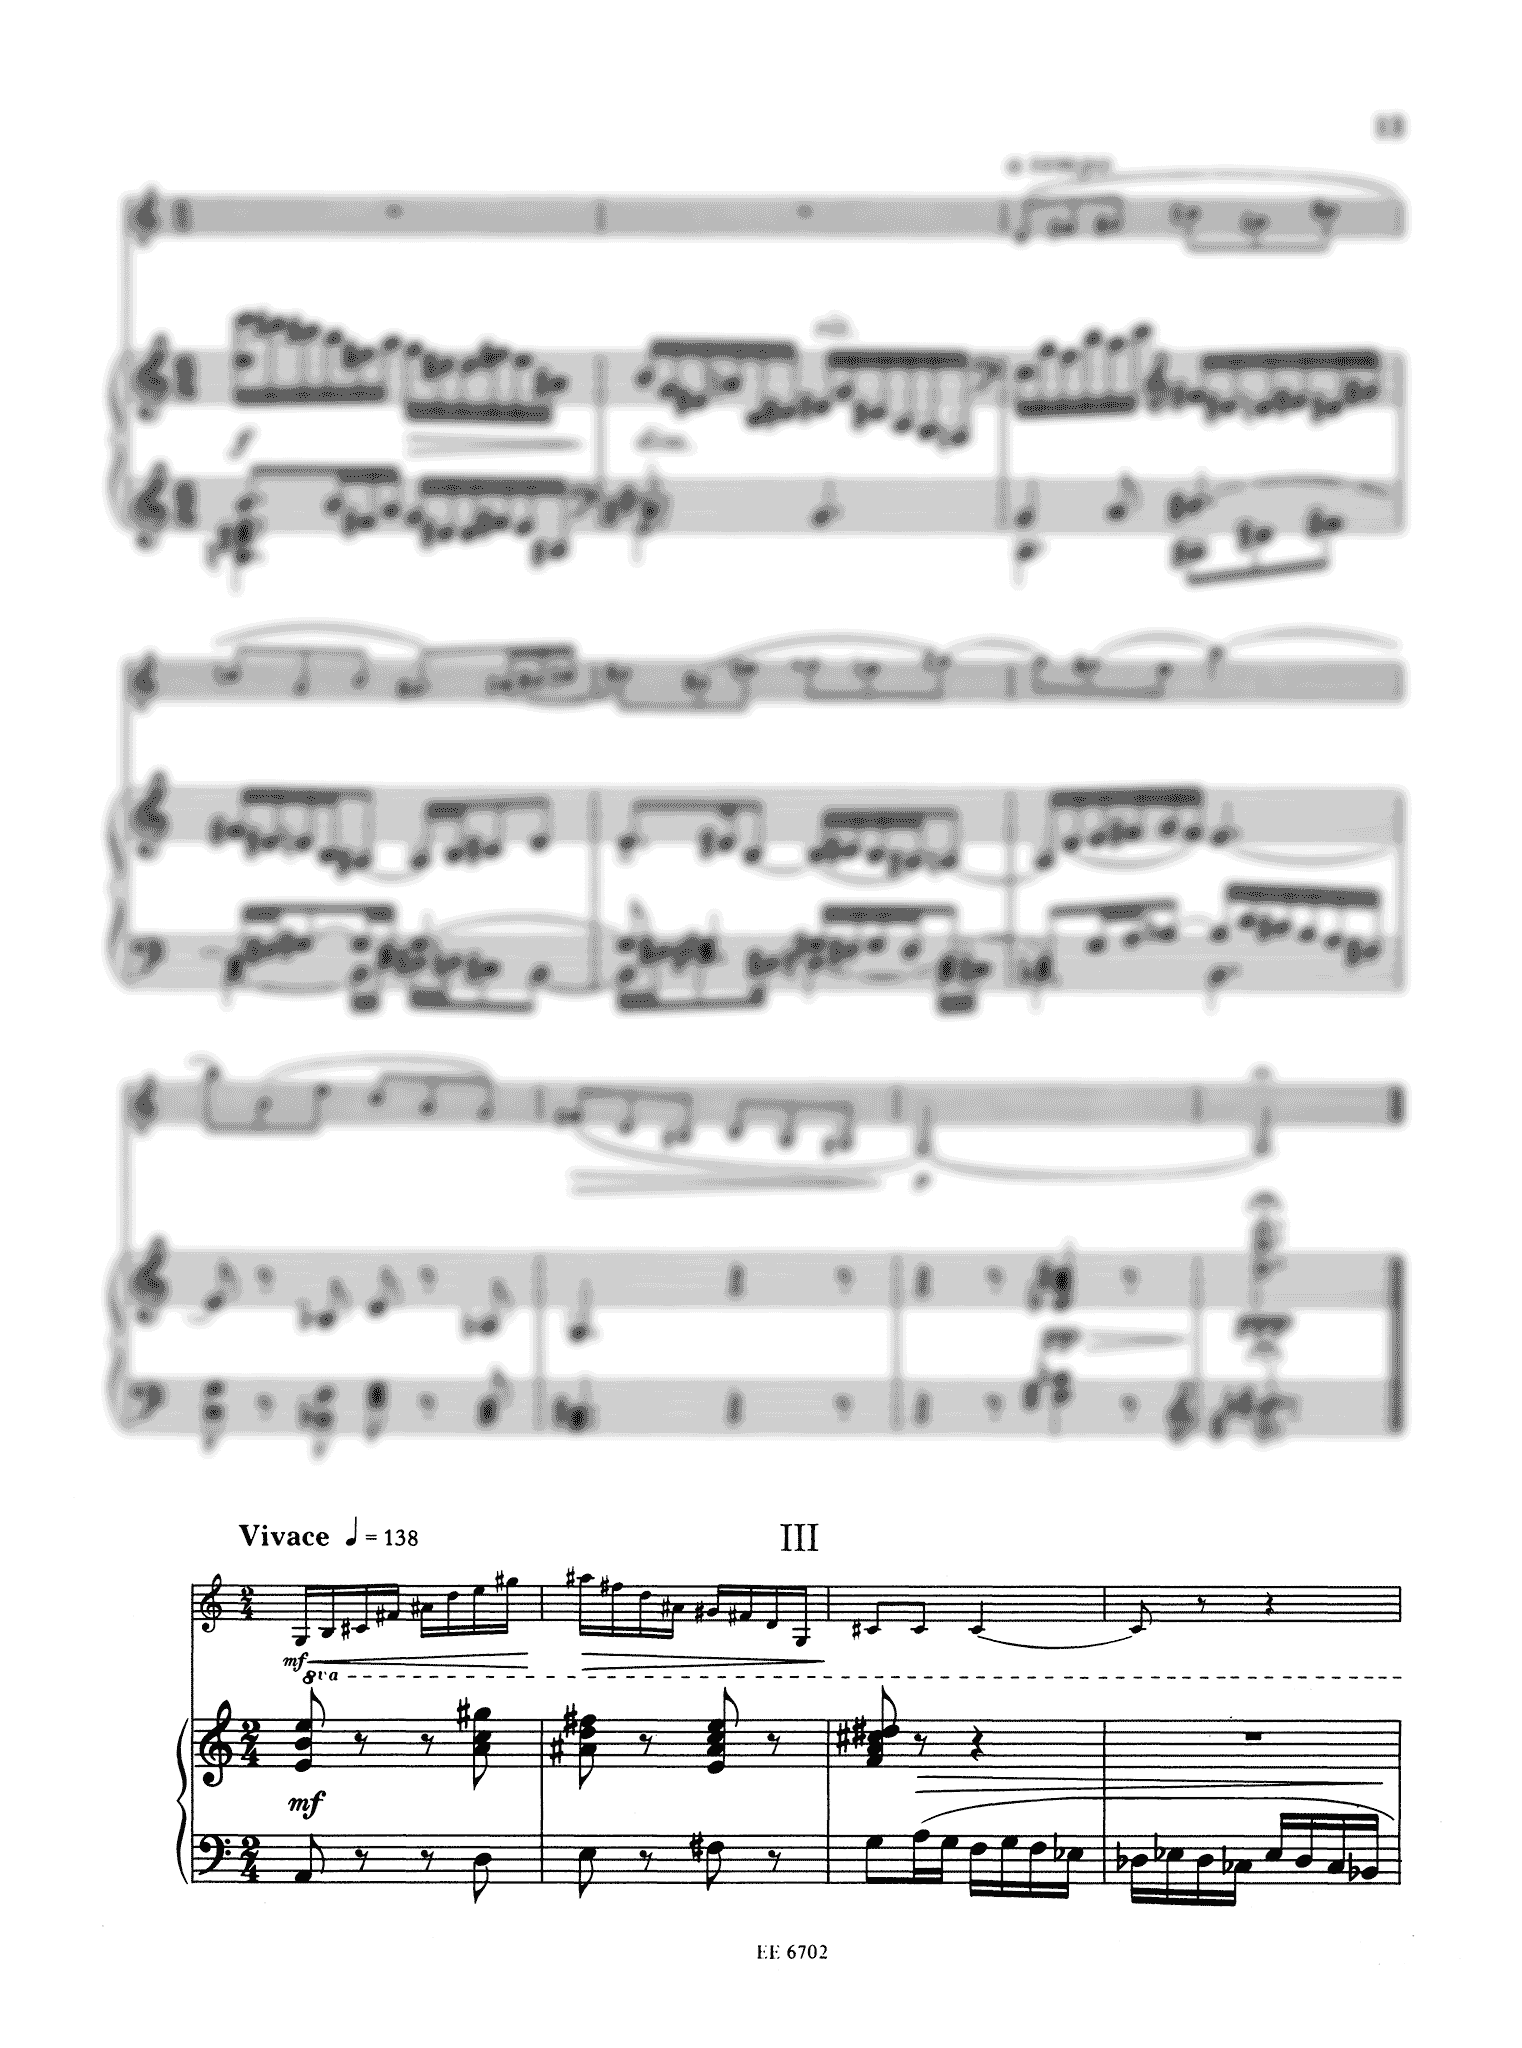 Jettel Trois Caprices clarinet and piano - Movement 3